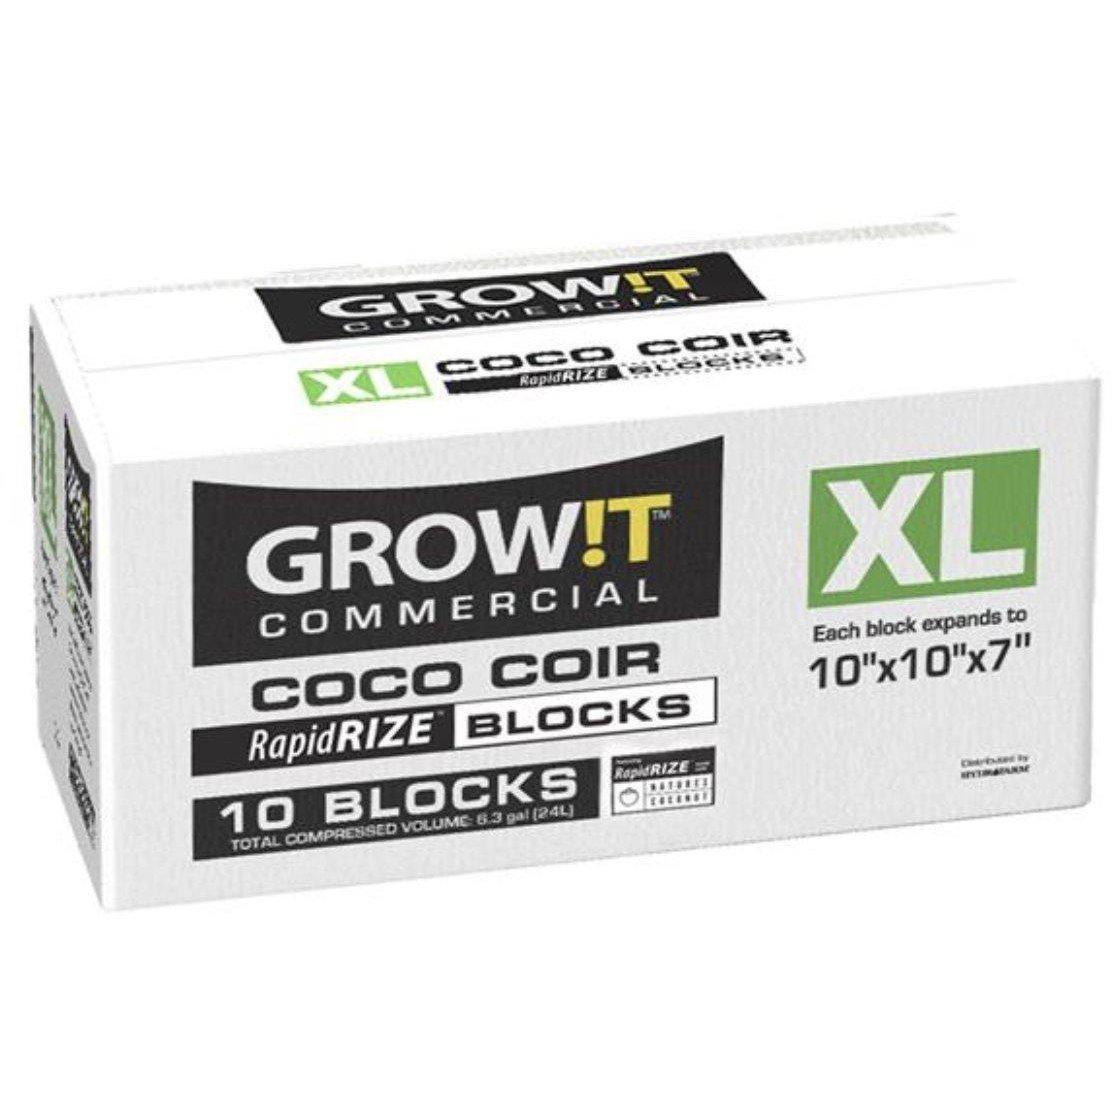 - RapidRIZE Commercial Coco Coir by Grow!t (Sold Individual) - 638104026949- Gardin Warehouse